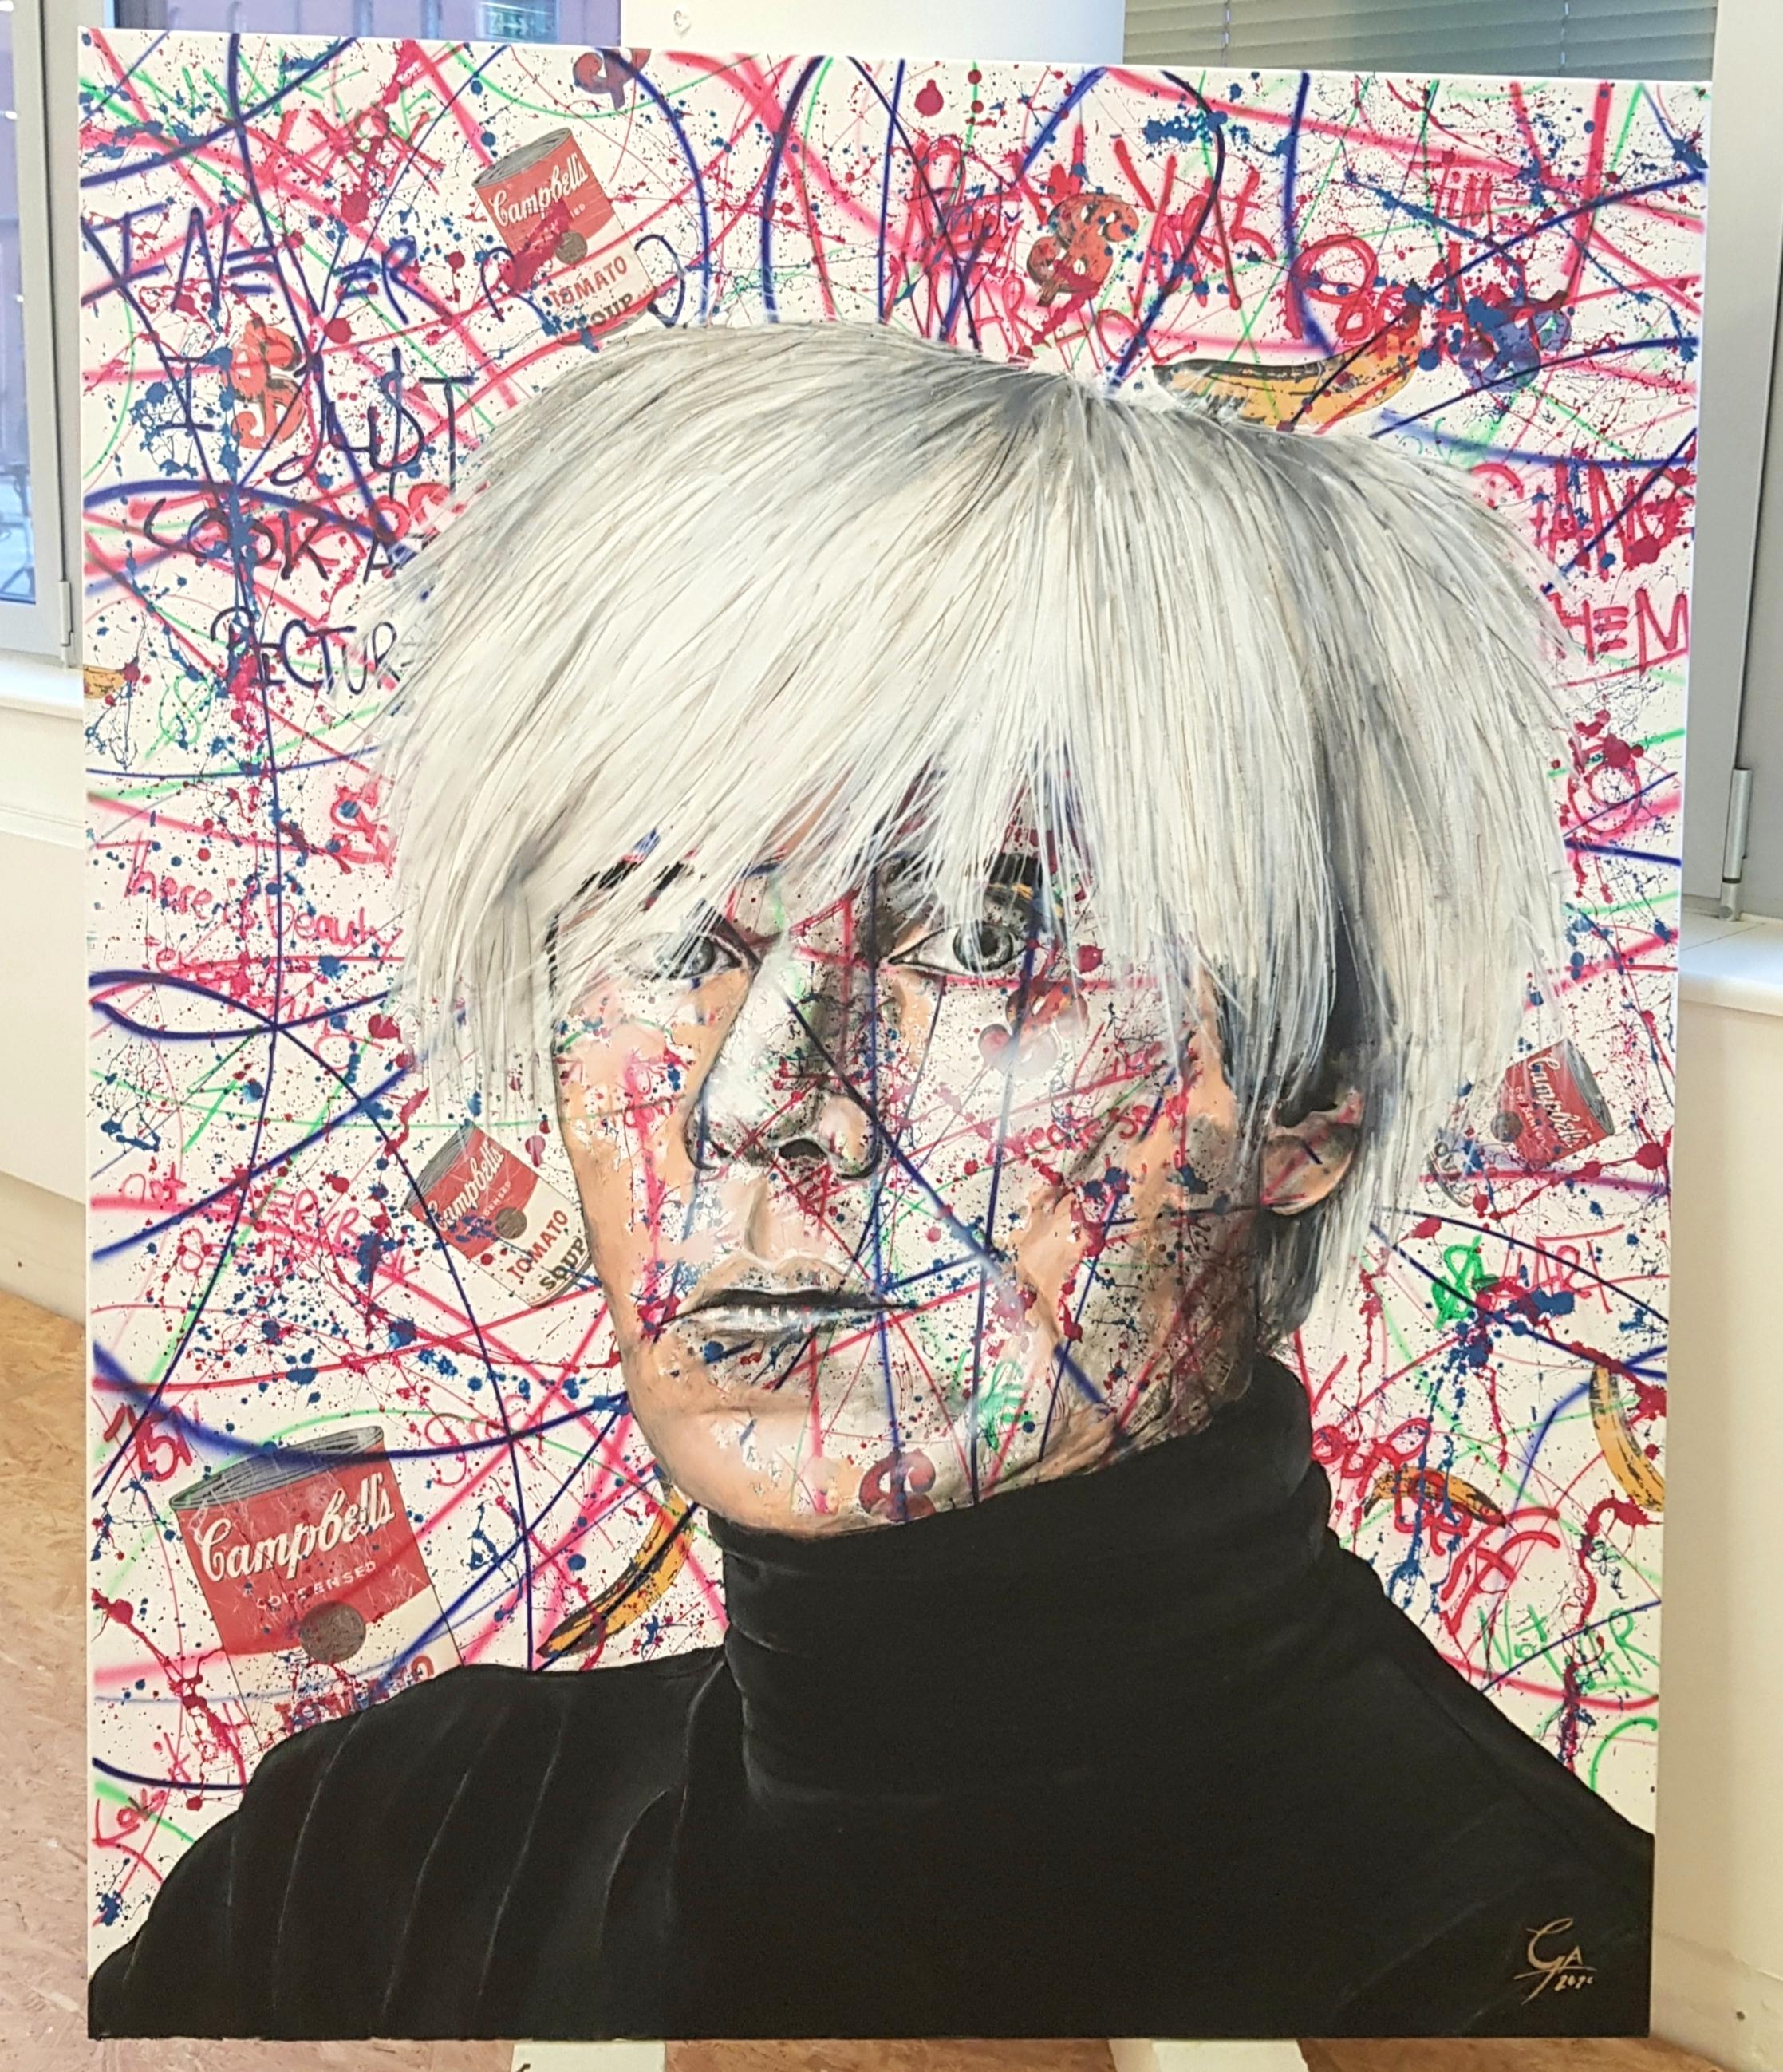 The Andy Warhol Piece - Pop Art, Warhol, Popart Style, 21stC., Contemporary Art - Gray Portrait Painting by Grafy